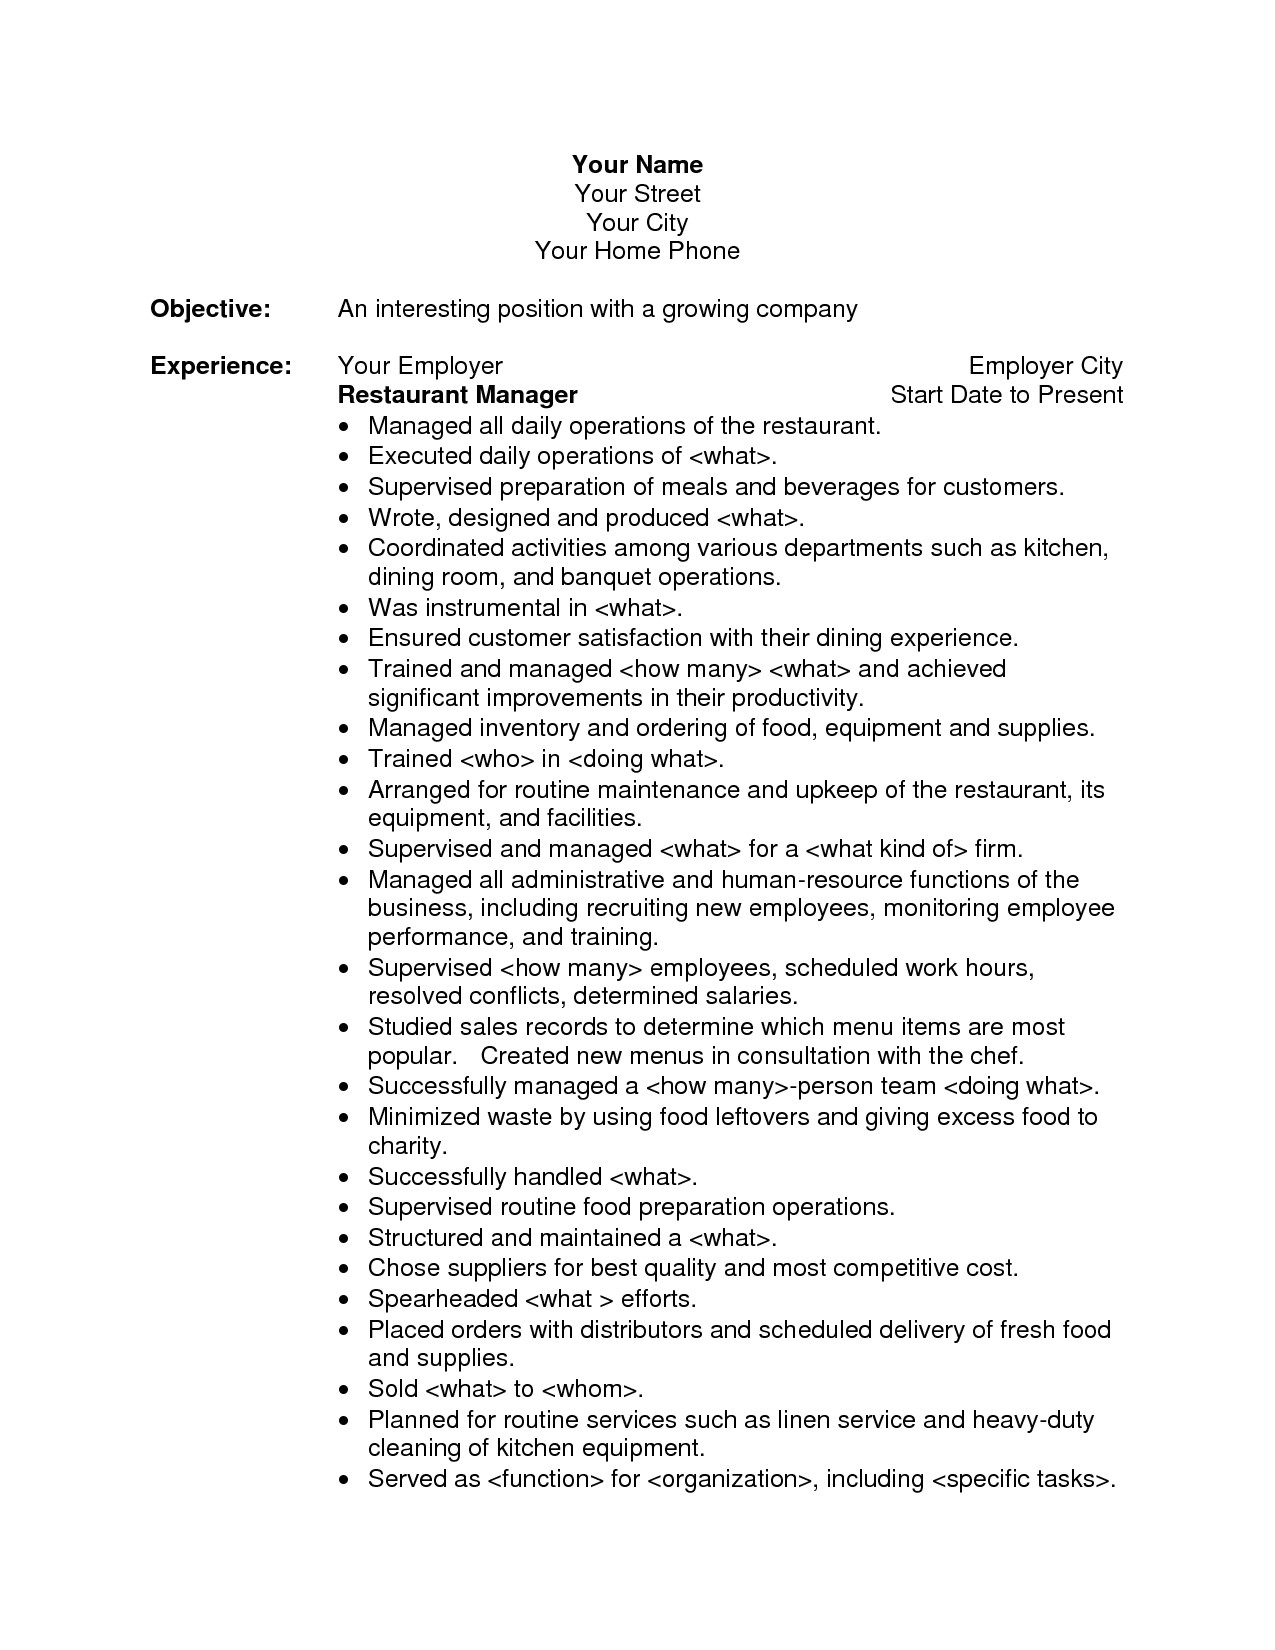 Sample Of Objectives In Resume for Hotel and Restaurant Management Restaurant Manager Resume Objective the Best Resume